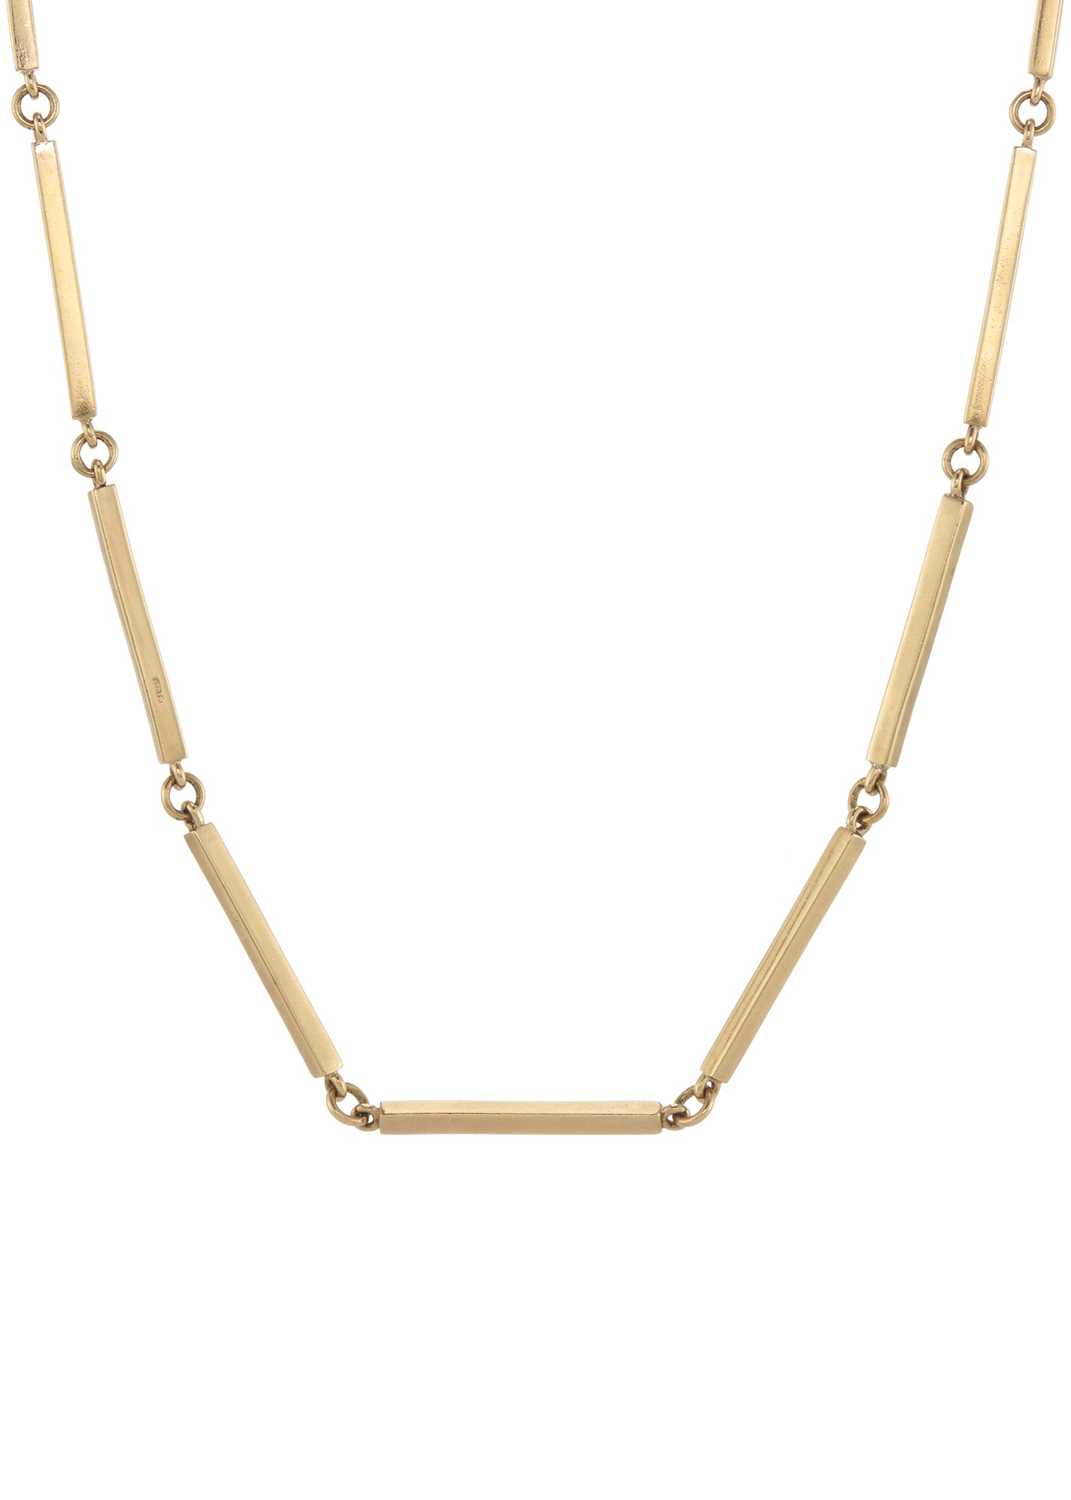 A 1970s 9ct gold bar-link necklace